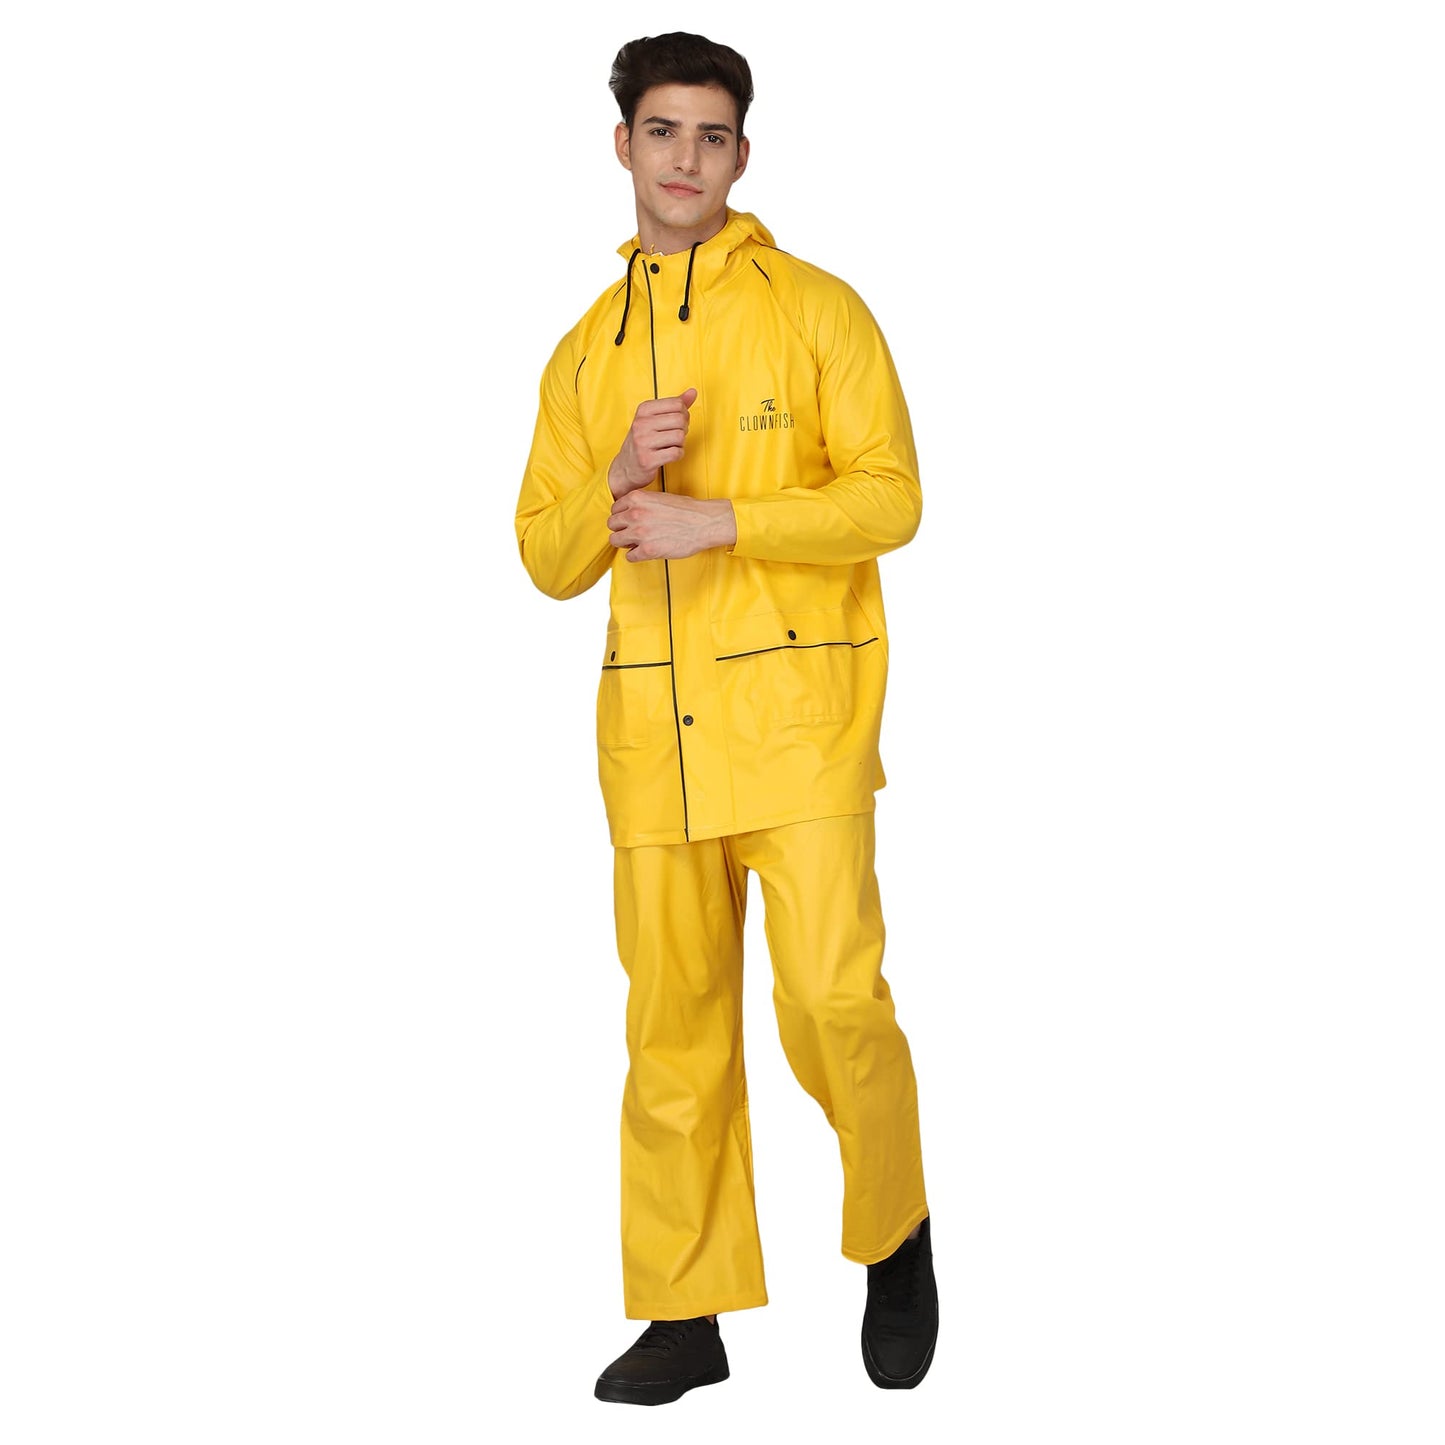 THE CLOWNFISH Azure Series Men's PVC Solid Waterproof Rain coat with Hood Set of Top and Bottom (Sky Blue, XX-Large)